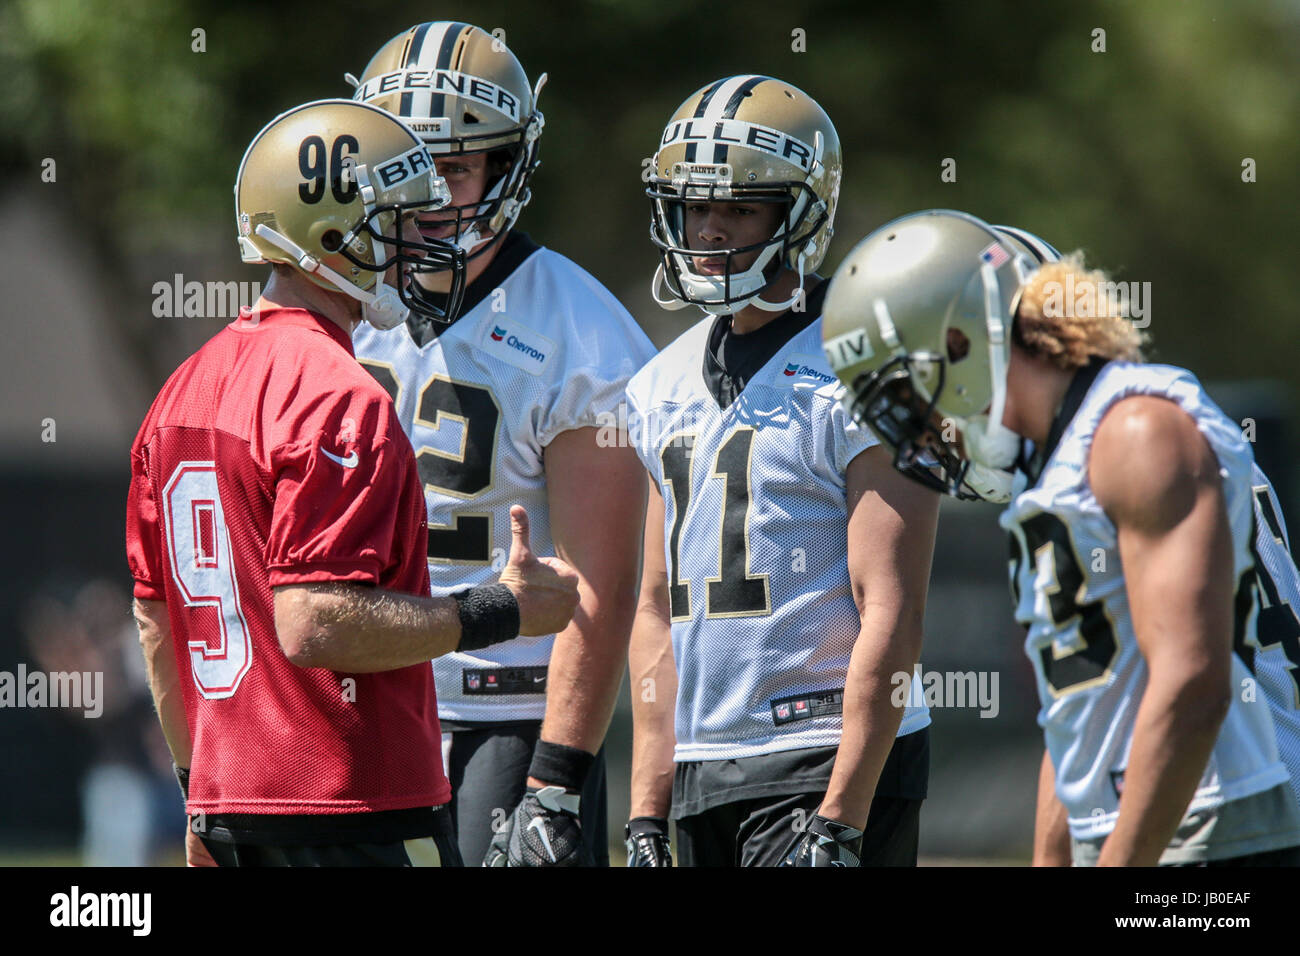 Metairie, Los Angeles, USA. 8th Jun, 2017. New Orleans Saints quarterback Drew Brees (9) calling plays with wide receiver Corey Fuller (11) during organized team activities at the New Orleans Saints Training Facility in Metairie, LA. Credit: Cal Sport Media/Alamy Live News Stock Photo